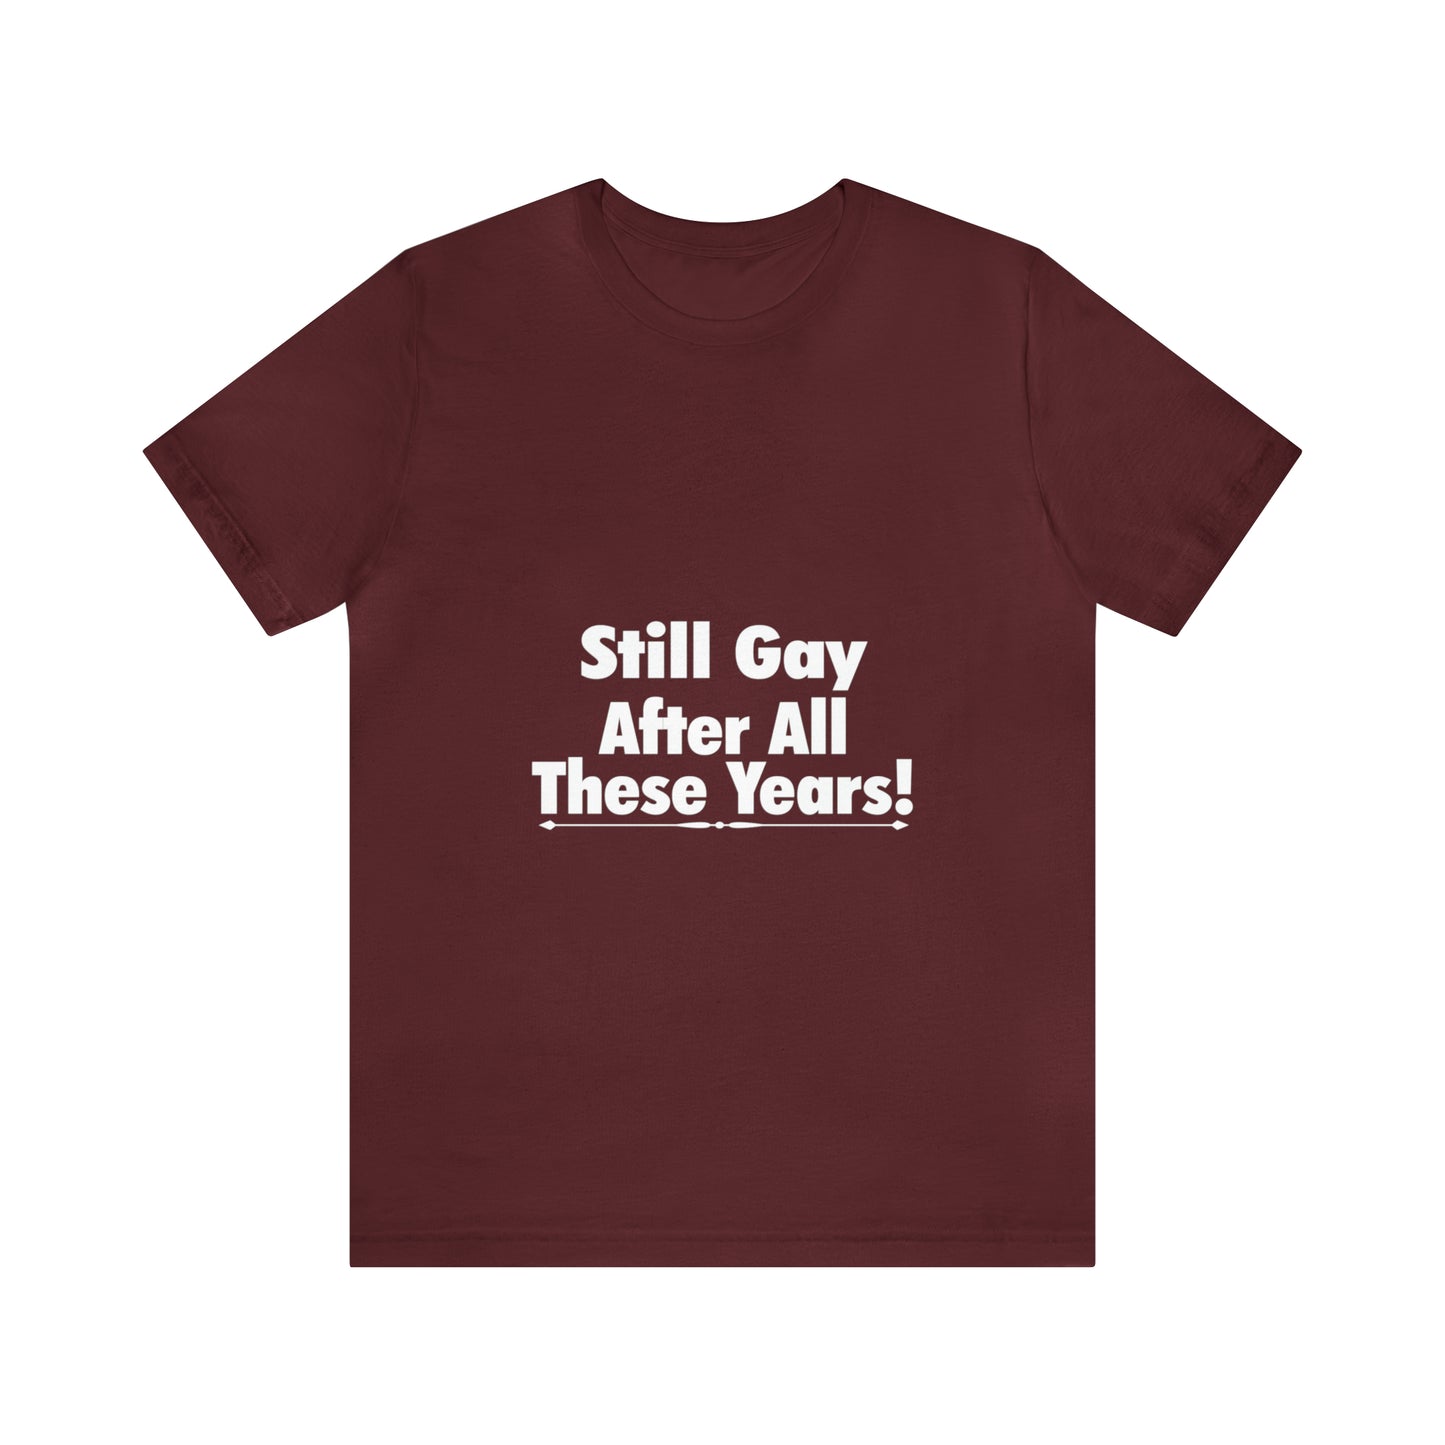 Still Gay After All These Years - Unisex T-Shirt